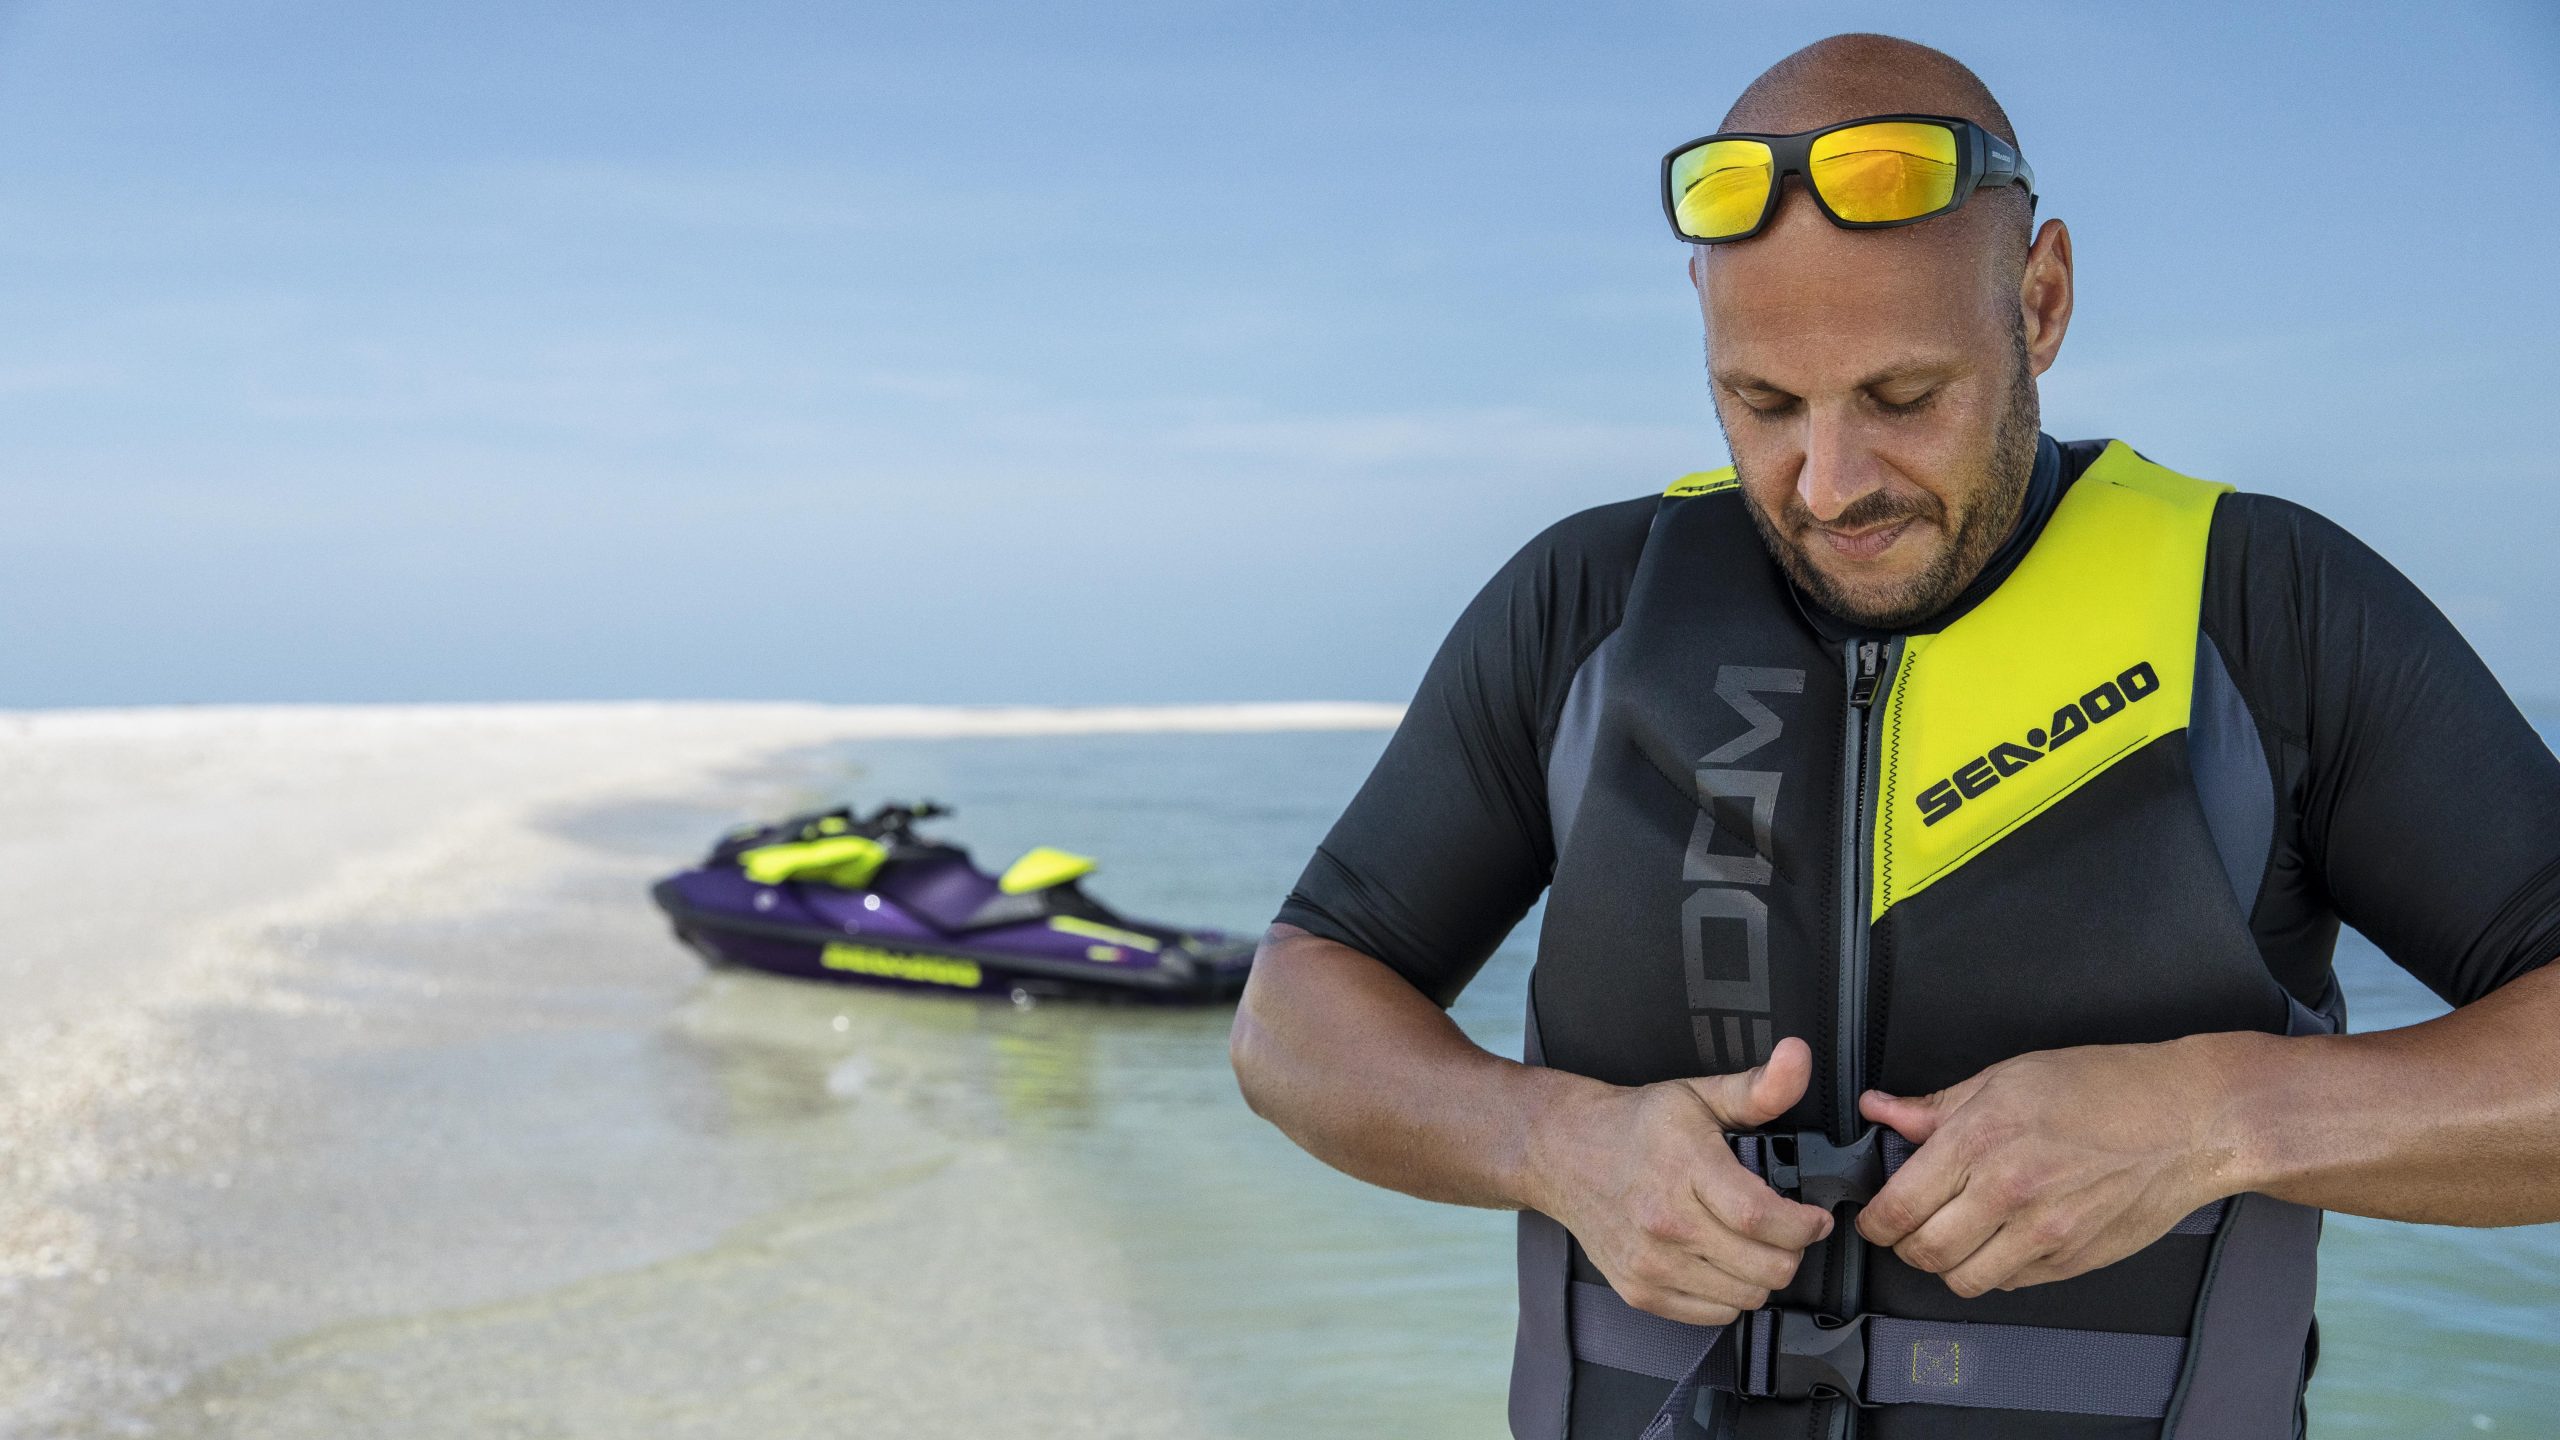 Top Gear: Essential equipment for Jet Skis and personal watercraft -